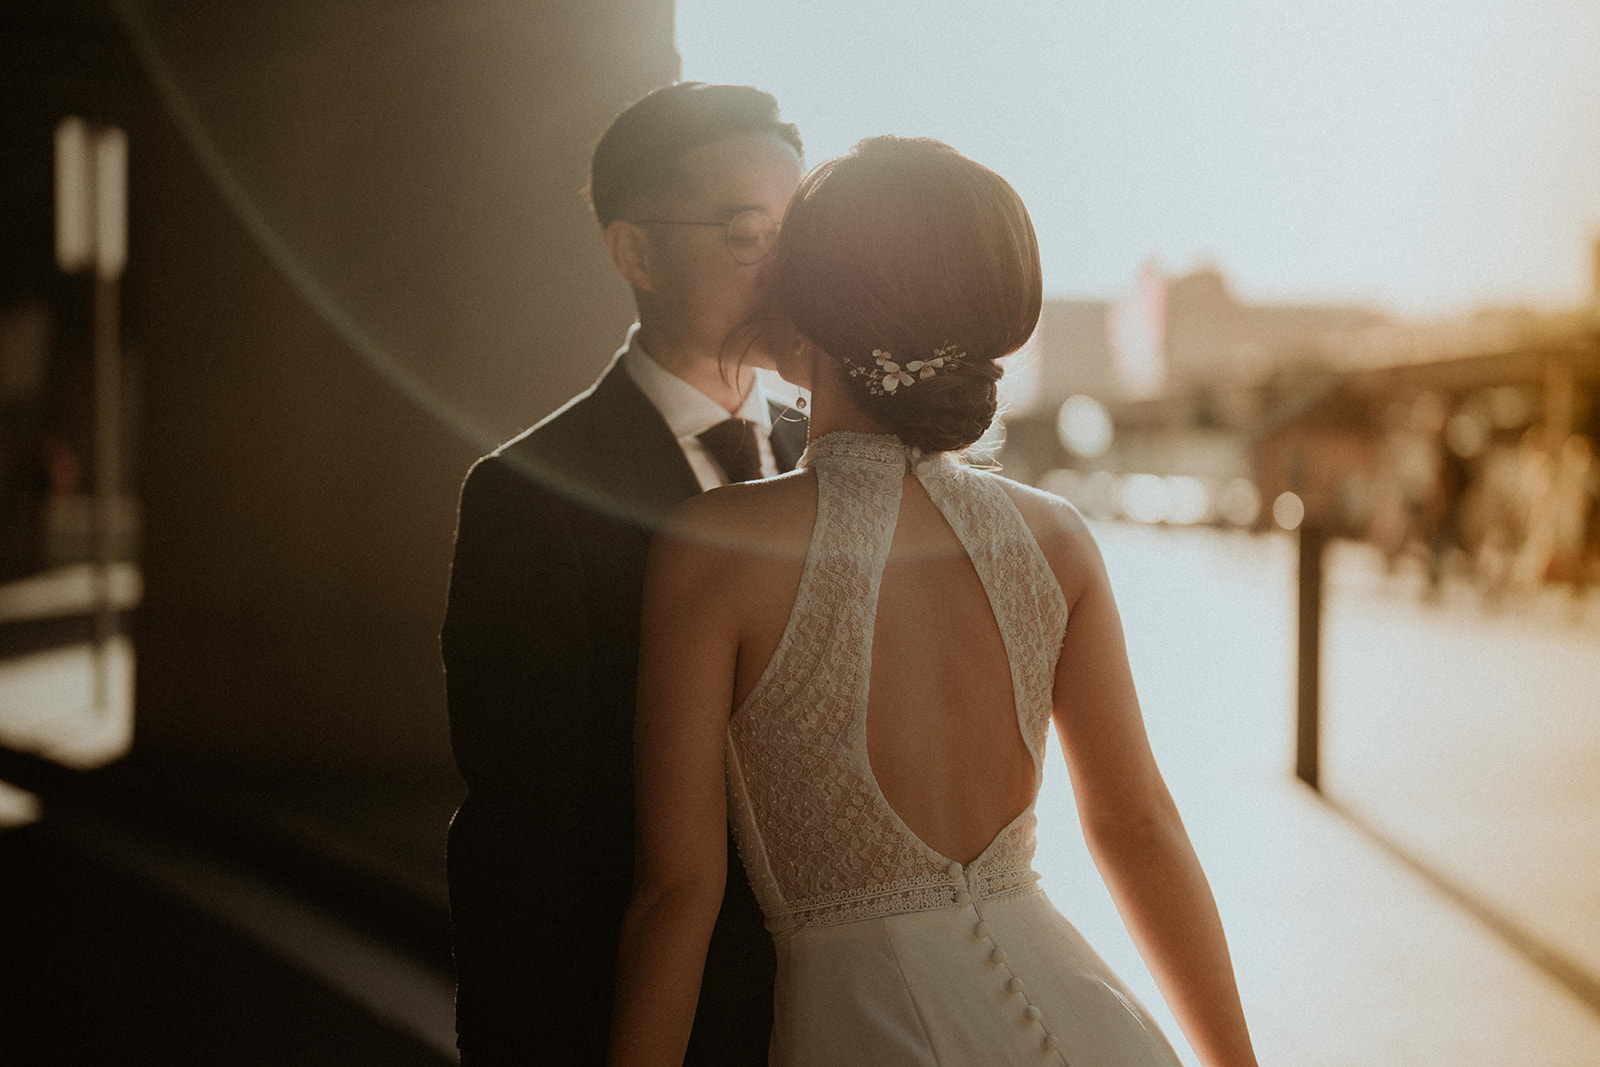 A very romantic photo of the sun behind the bride and groom, creating a lens flare